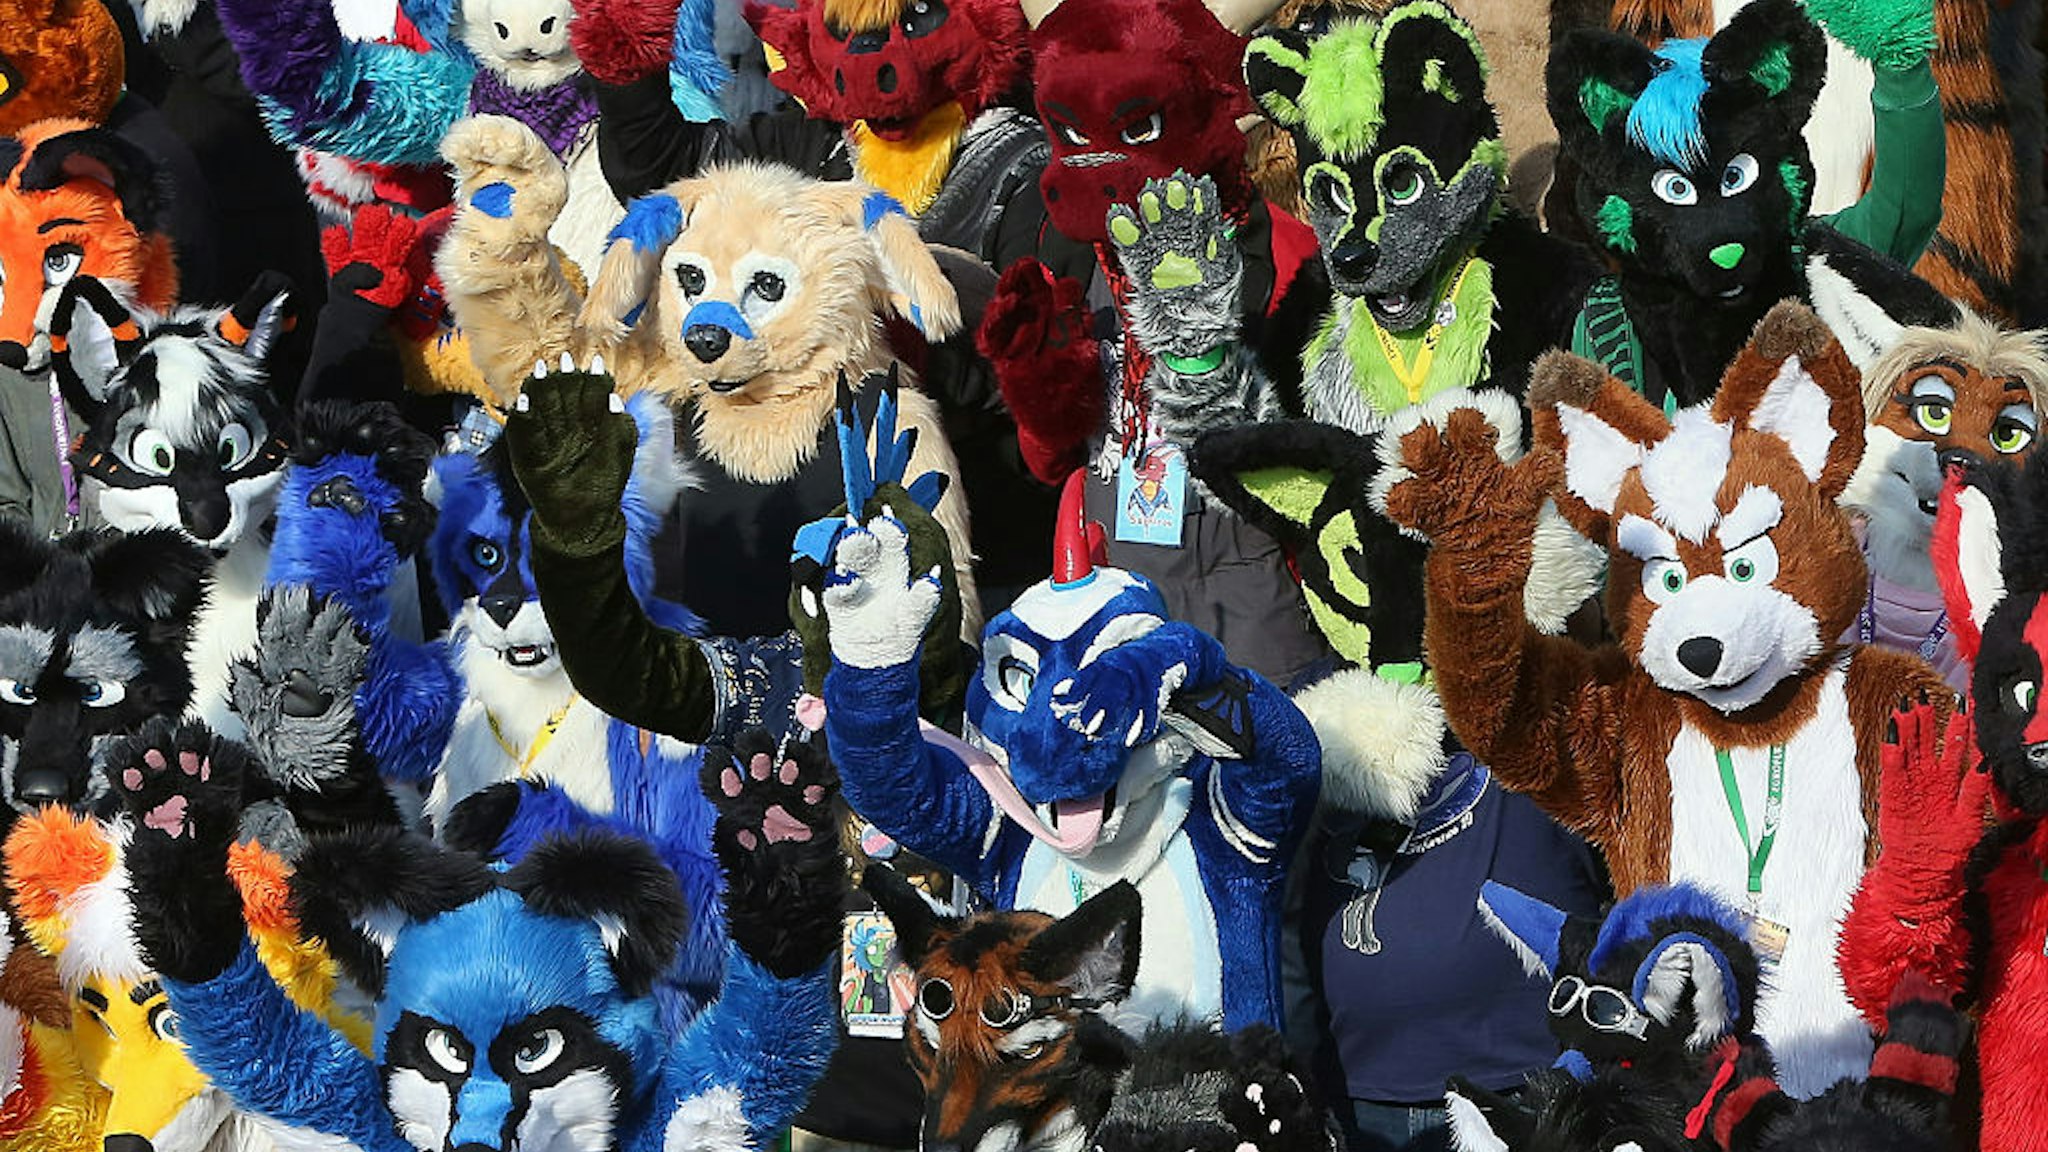 BERLIN, GERMANY - AUGUST 21: Furry enthusiasts gather at the Eurofurence 2015 conference on August 21, 2015 in Berlin, Germany. Furry fandom, a term used in zines as early as 1983 and also known as furrydom, furridom, fur fandom or furdom, refers to a subculture whose followers express an interest in anthropomorphic, or half-human, half-animal, creatures in literature, cartoons, pop culture, or other artistic contexts. Many but not all of the followers of the movement wear furry animal costumes. The earliest citation of anthropomorphic literature regularly cited by furry fans is Aesop's Fables, dating to around 500 BC. (Photo by Adam Berry/Getty Images)